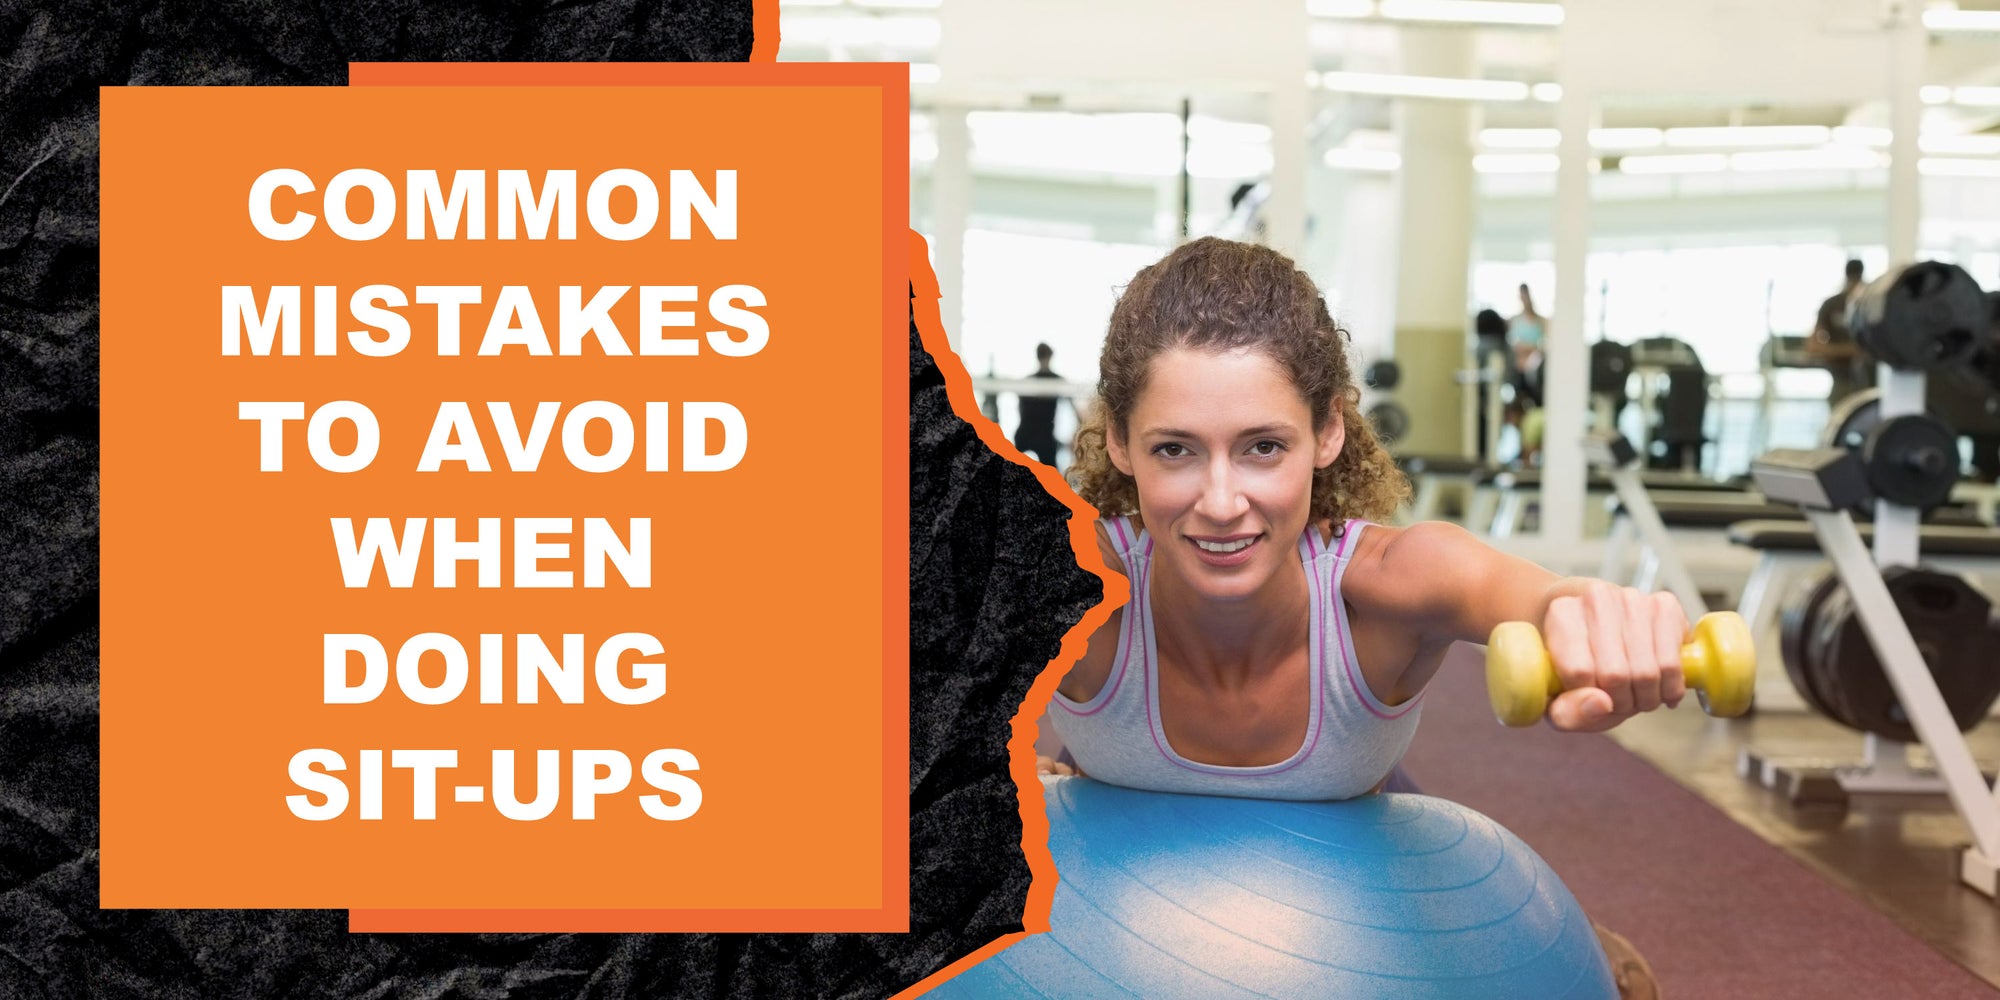 Common Mistakes To Avoid When Doing Sit-Ups